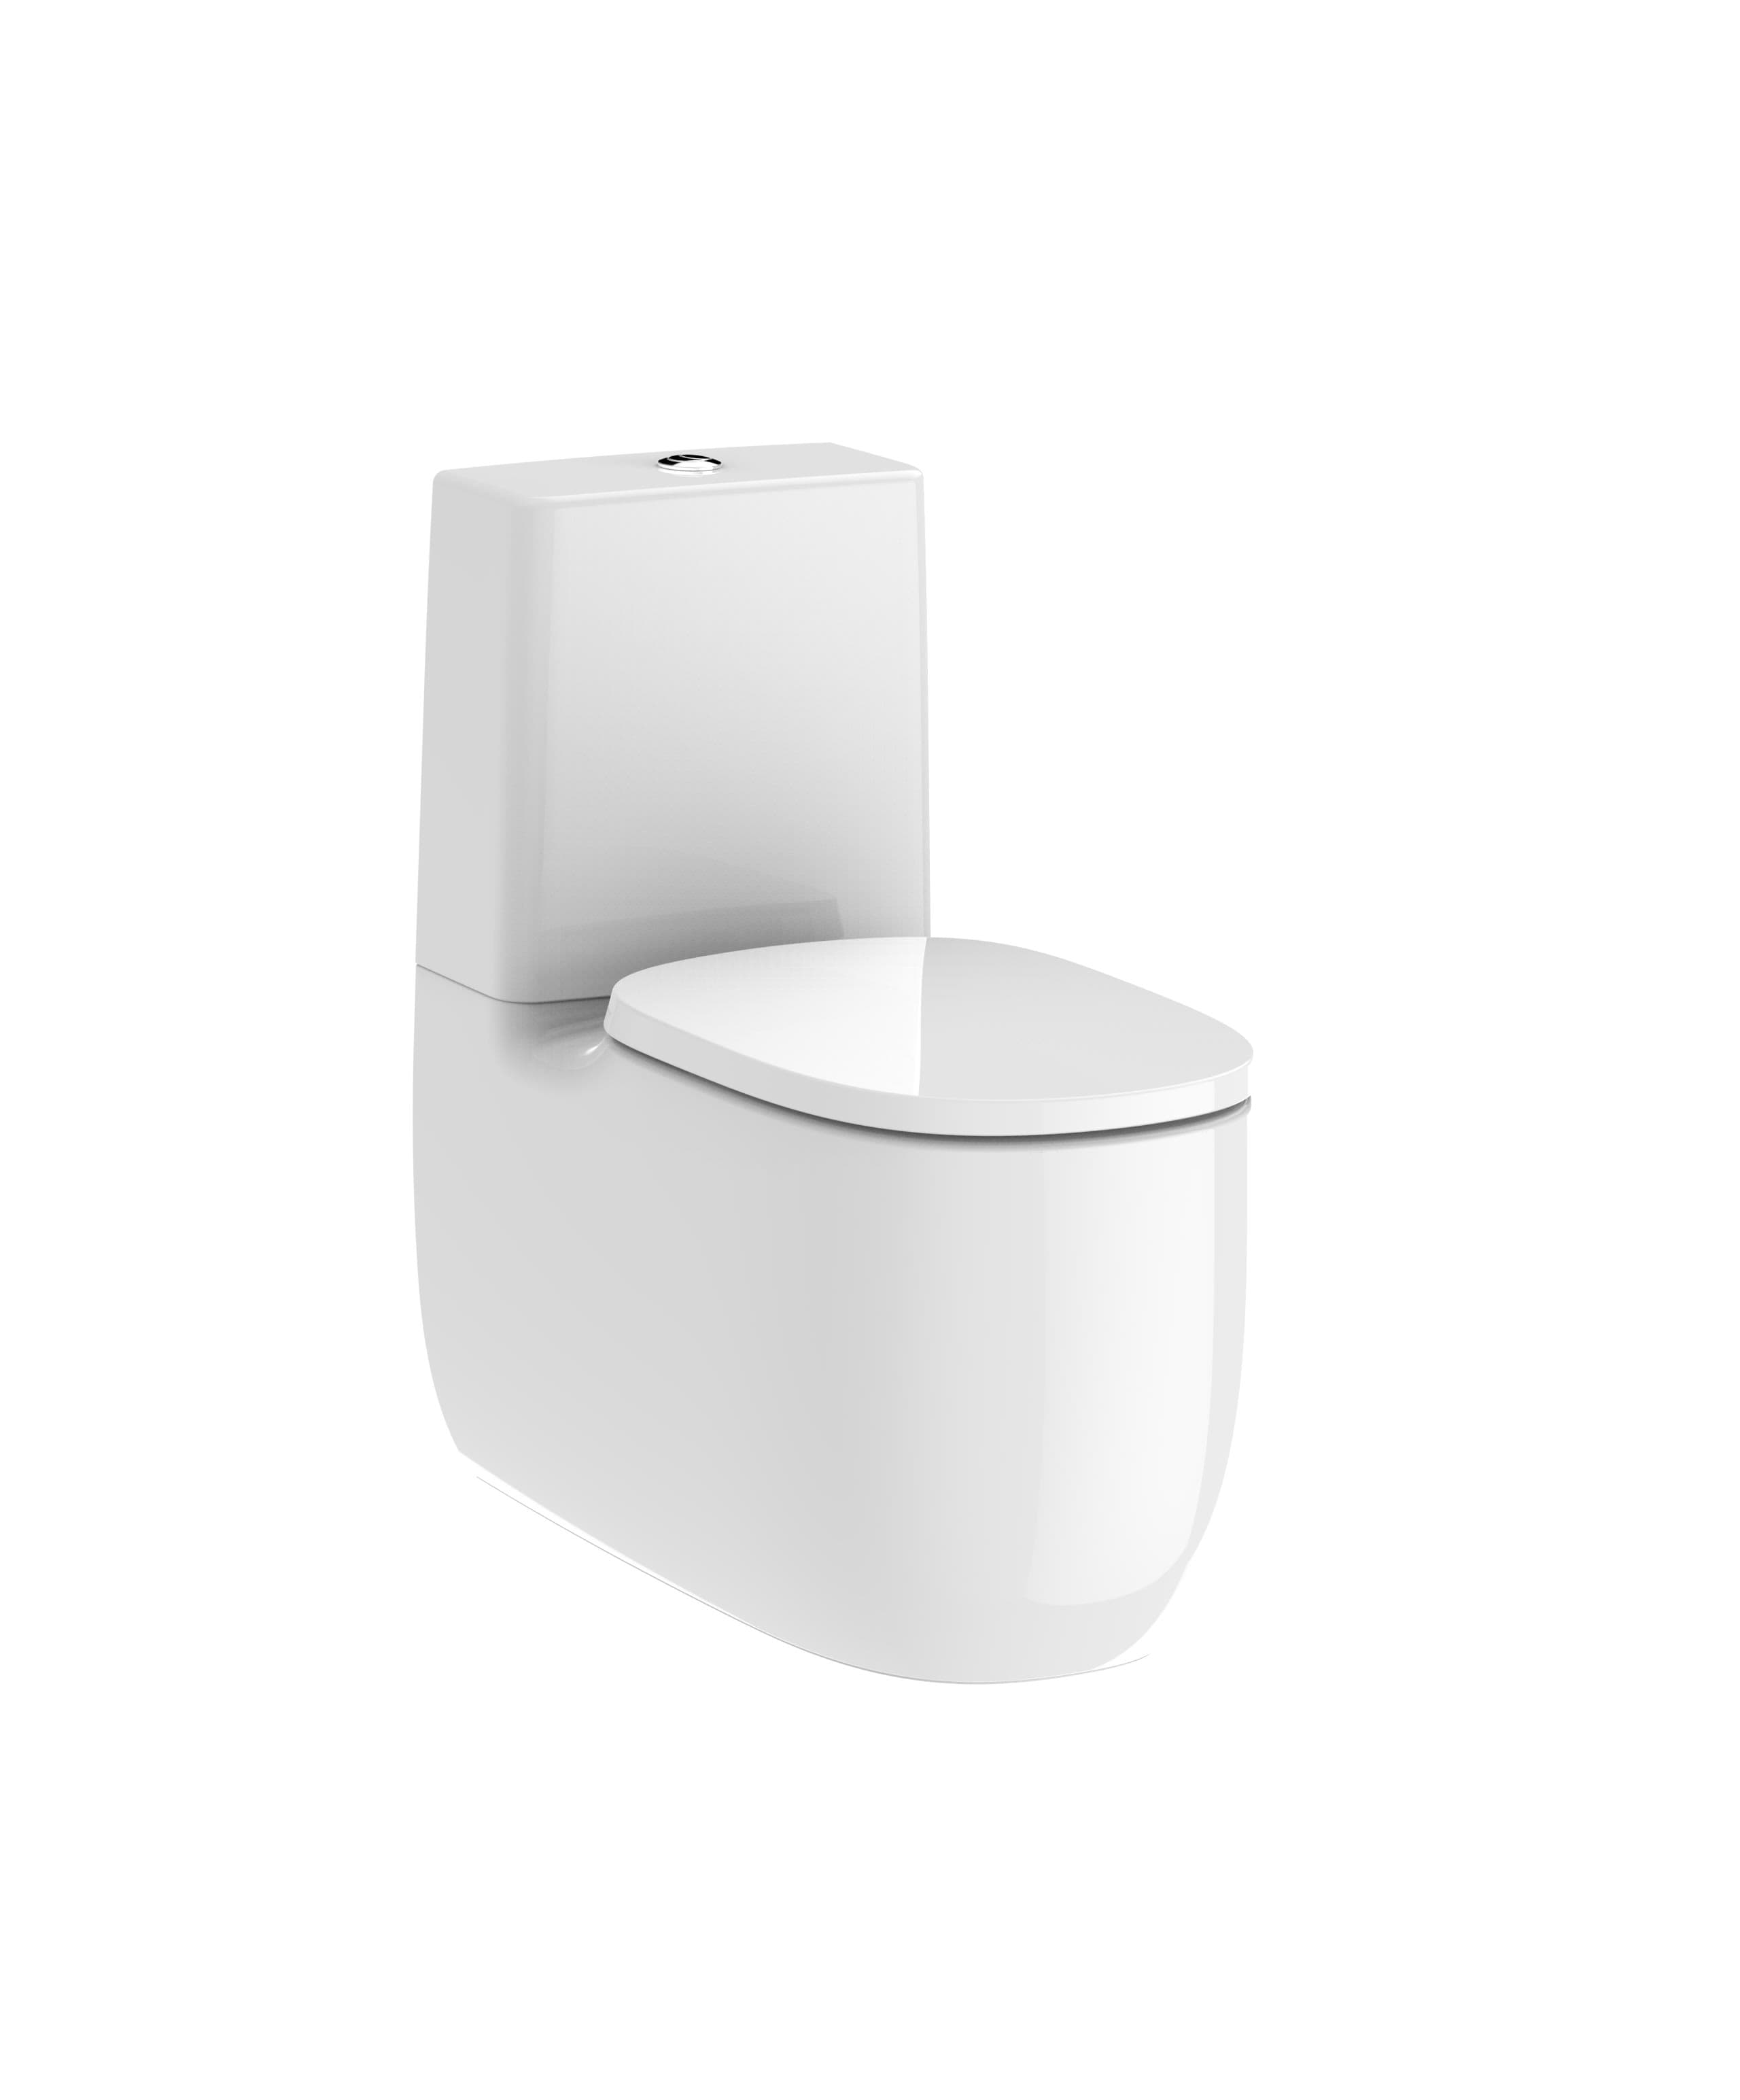 Back to wall vitreous china close-coupled Rimless WC with dual outlet Roca A3420B9000